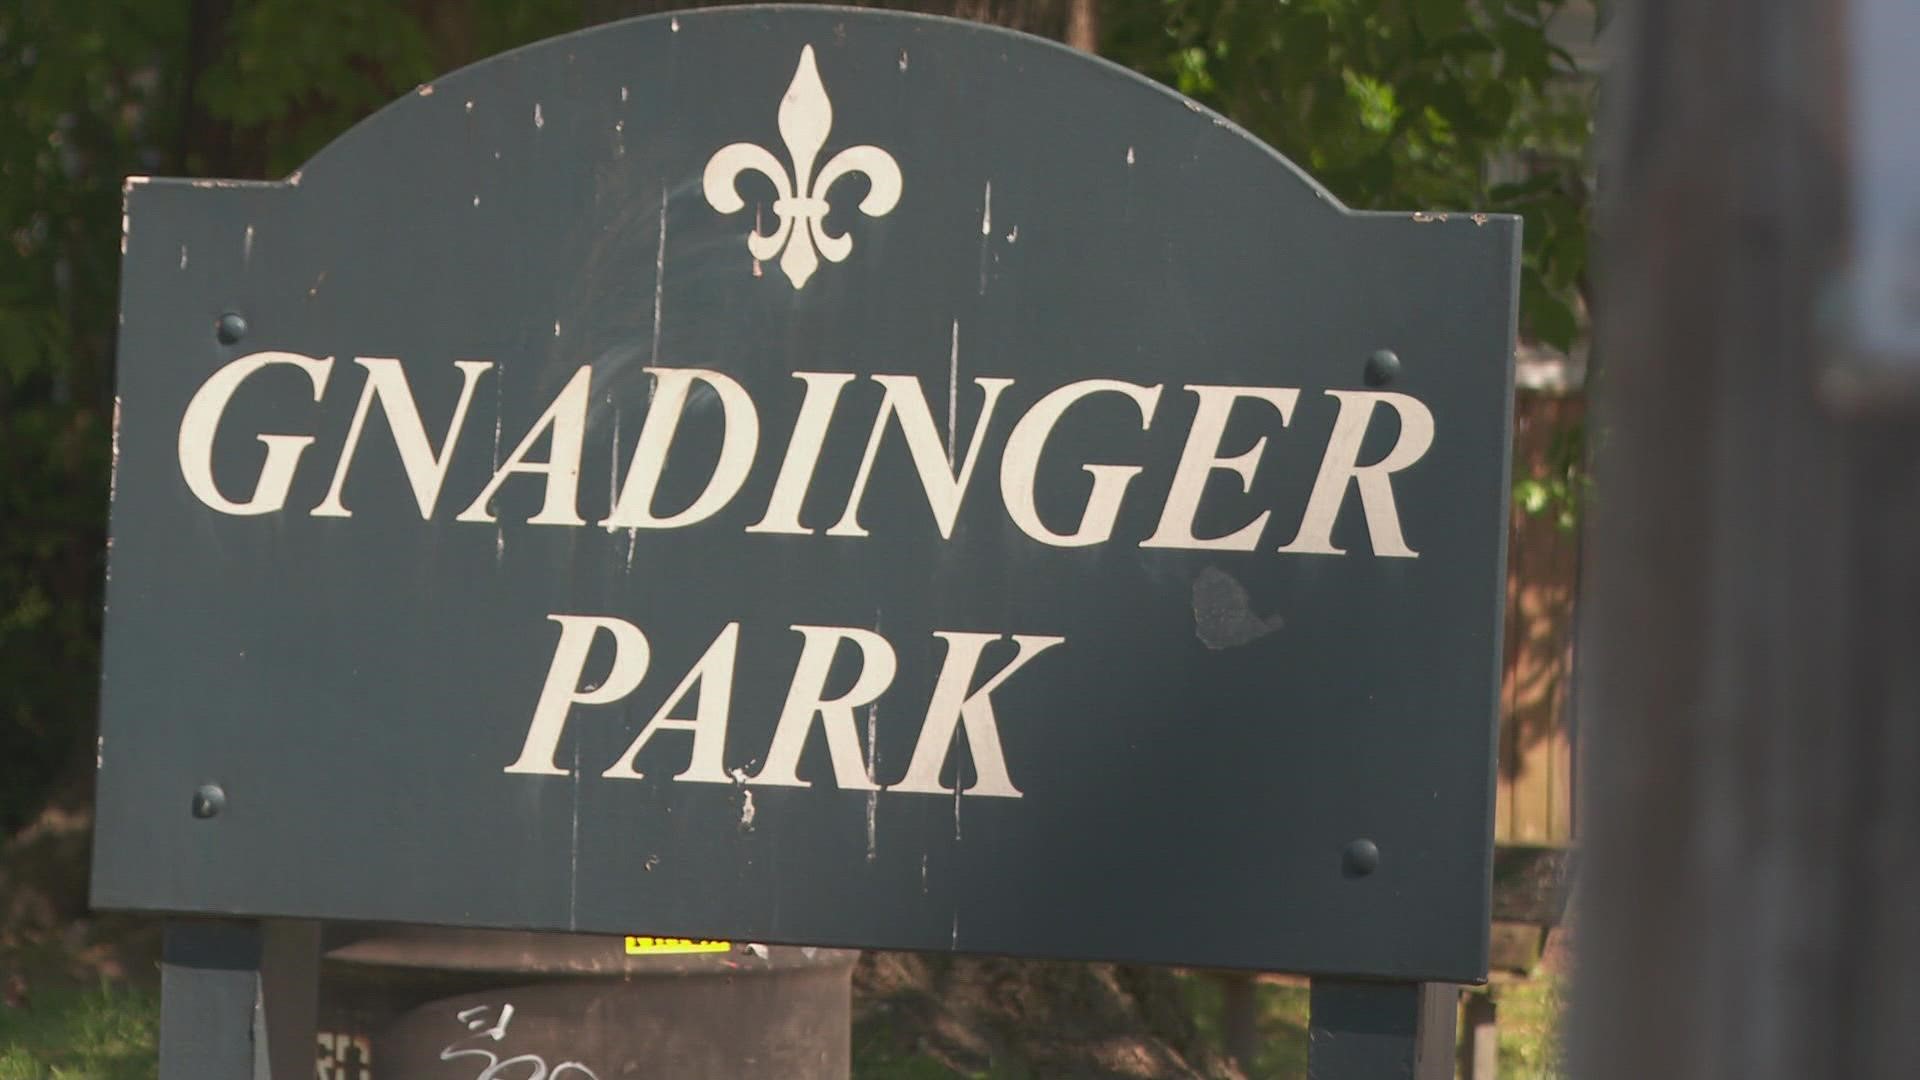 There are 120 parks spread out across Louisville. The city's smallest one, Gnadinger Park, is .03 acres. "You can walk around it in like 10 seconds."